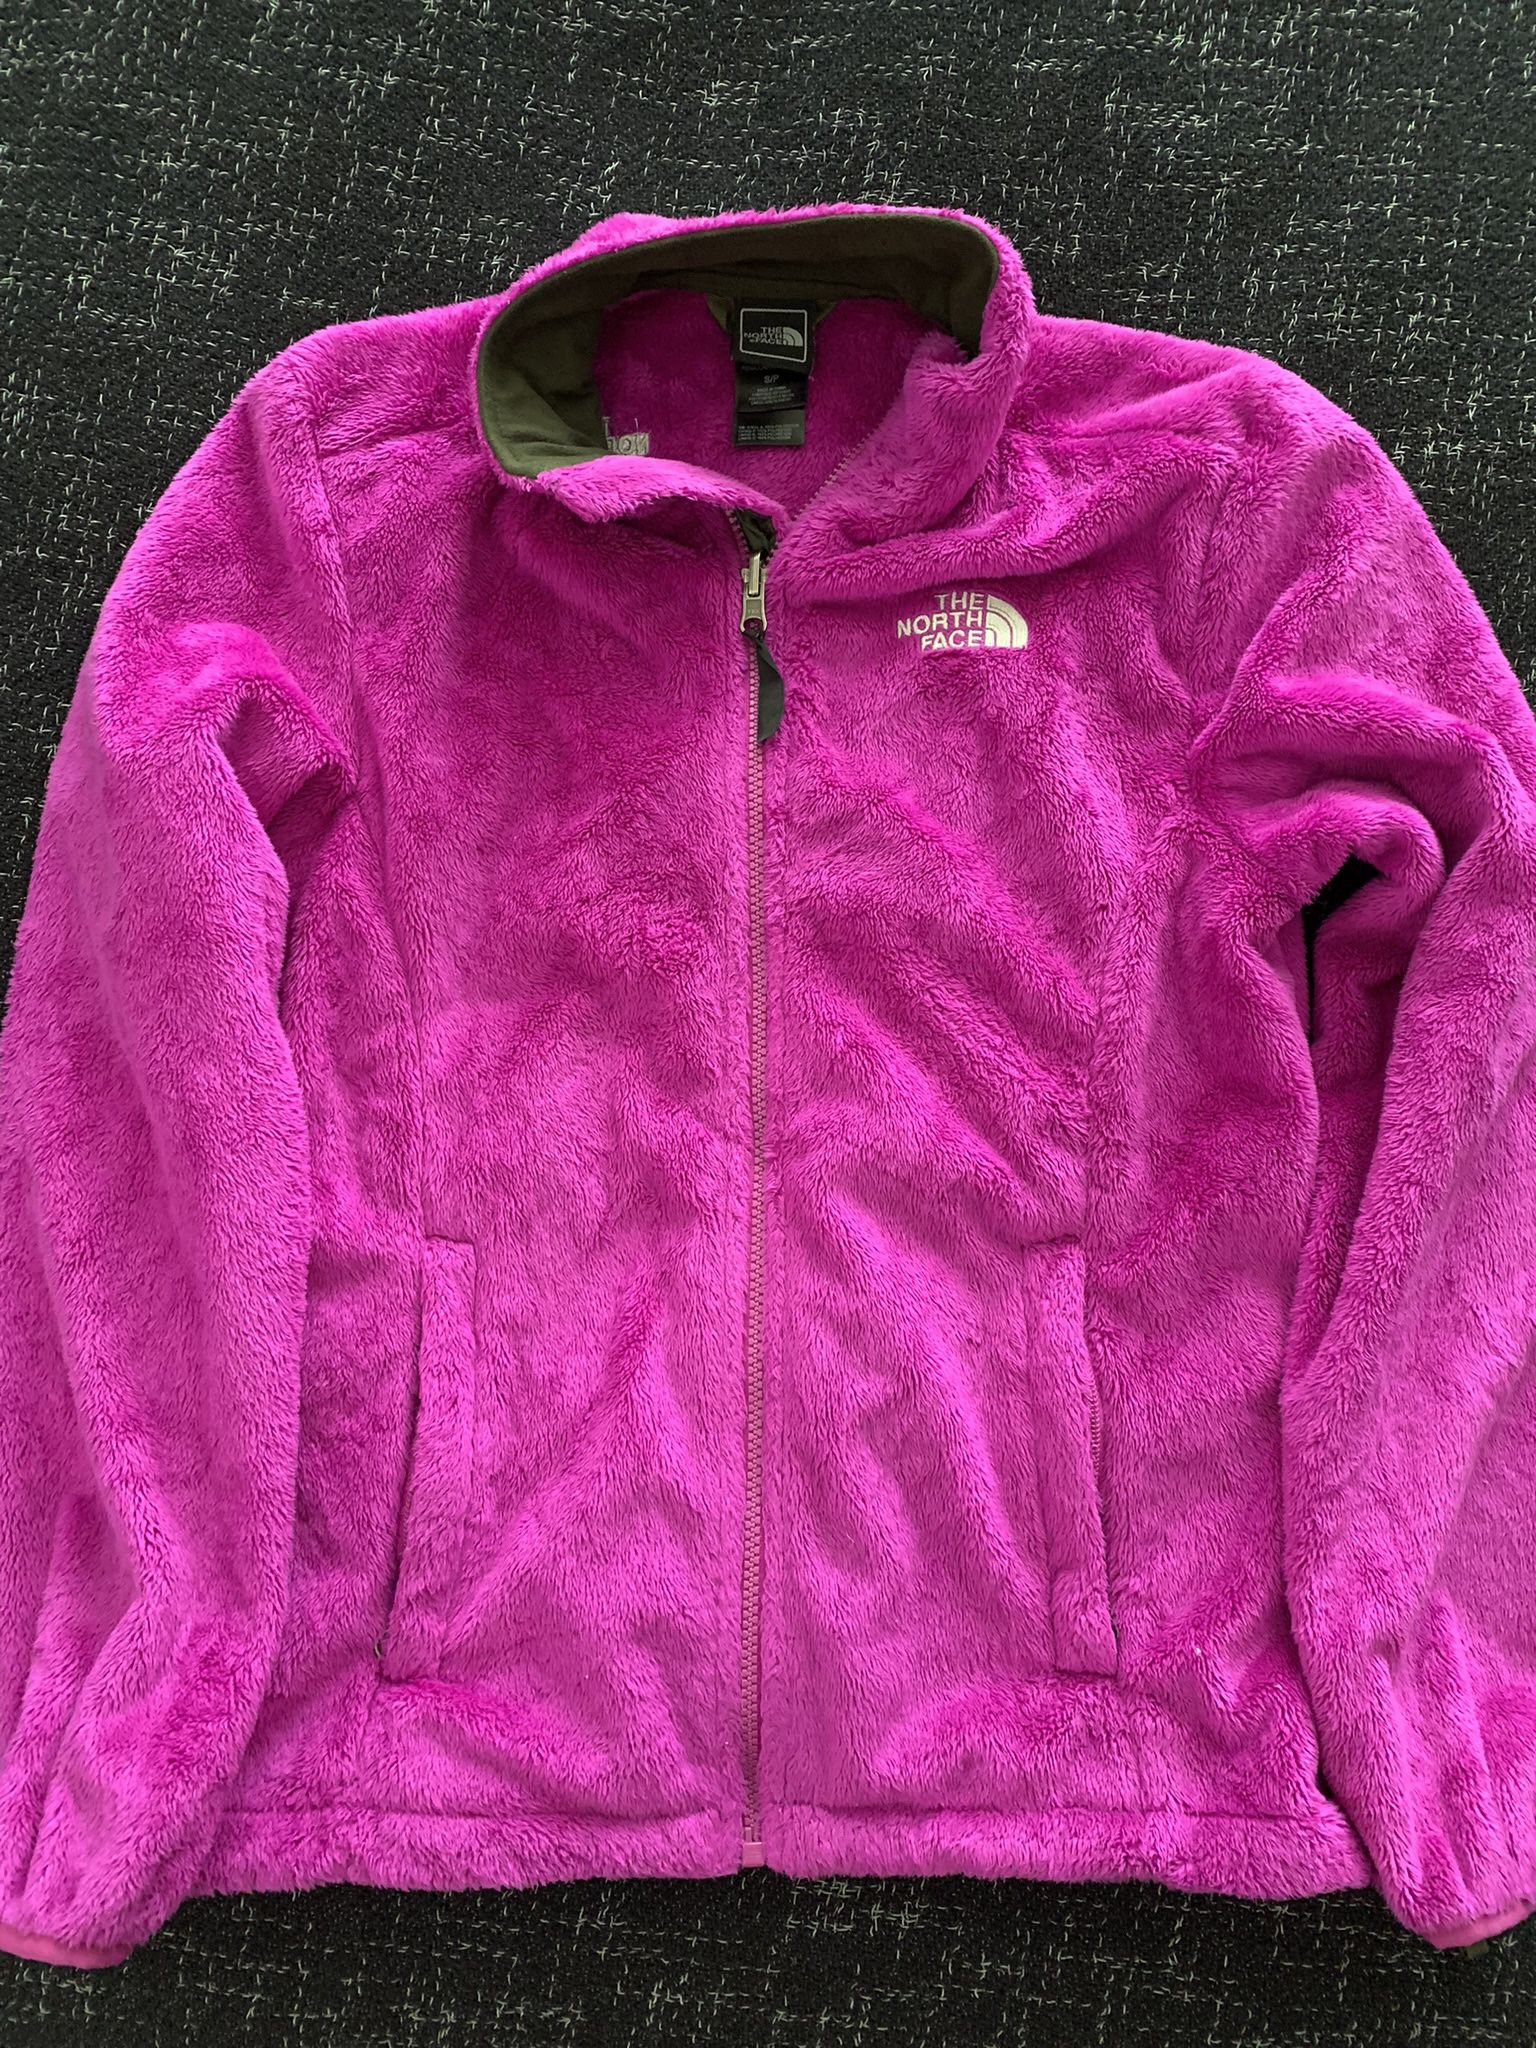 Women's North Face Jacket Small